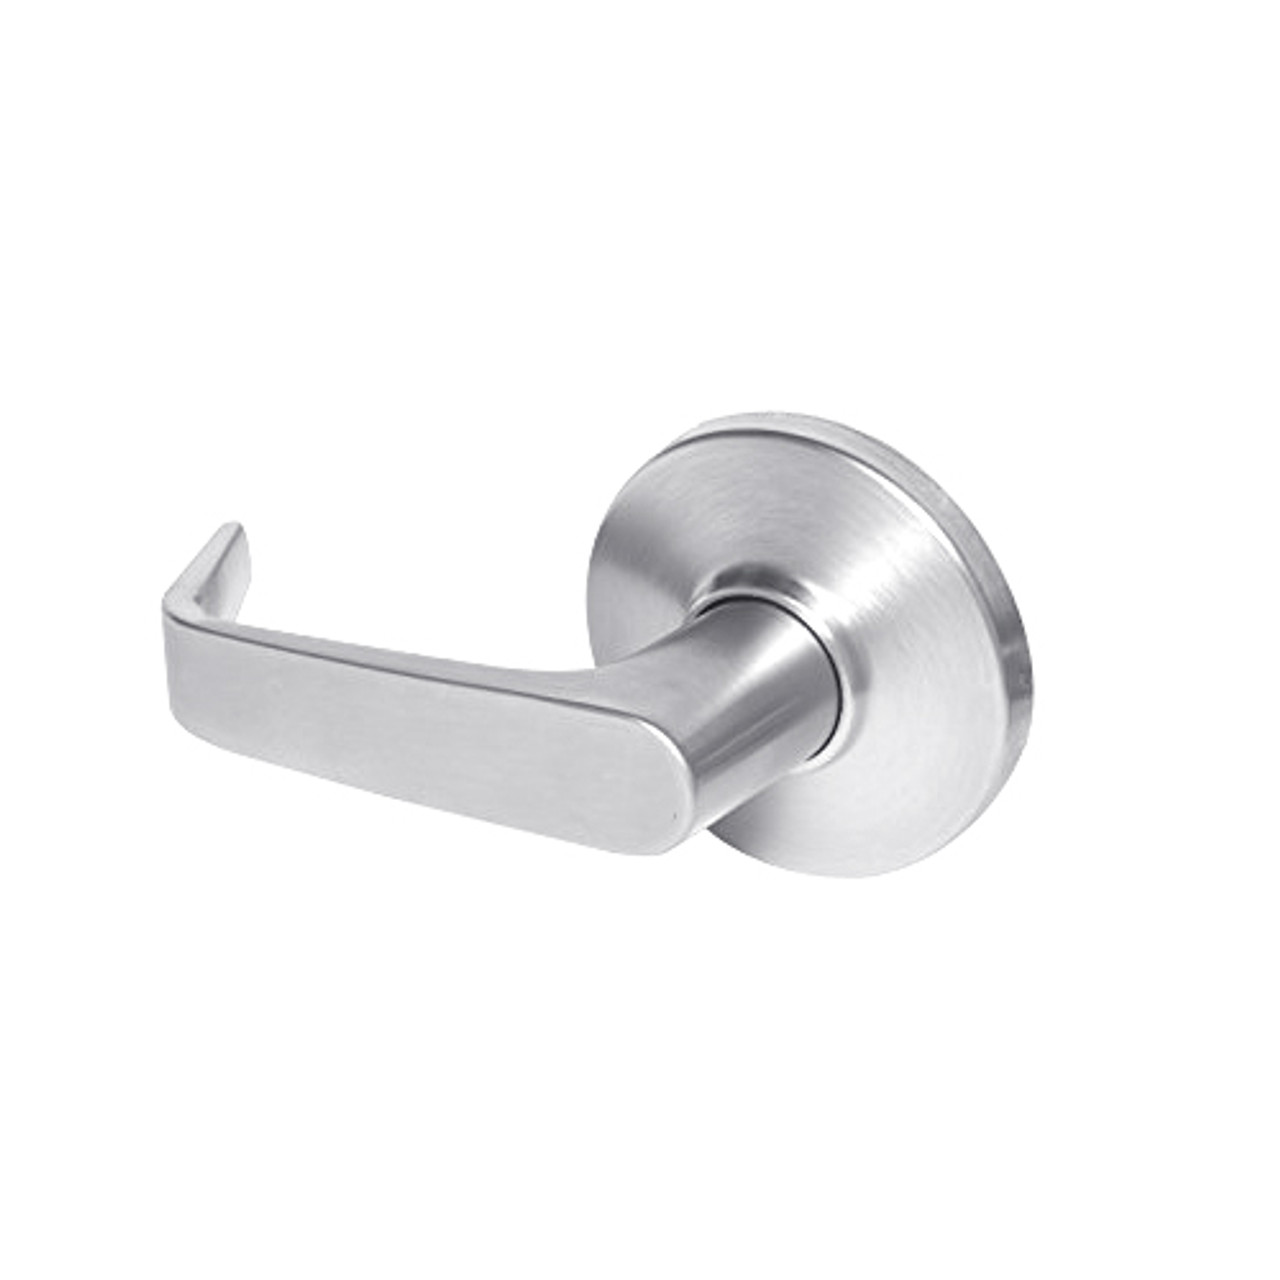 9K30LL15DS3625 Best 9K Series Hospital Privacy Heavy Duty Cylindrical Lever Locks with Contour Angle with Return Lever Design in Bright Chrome